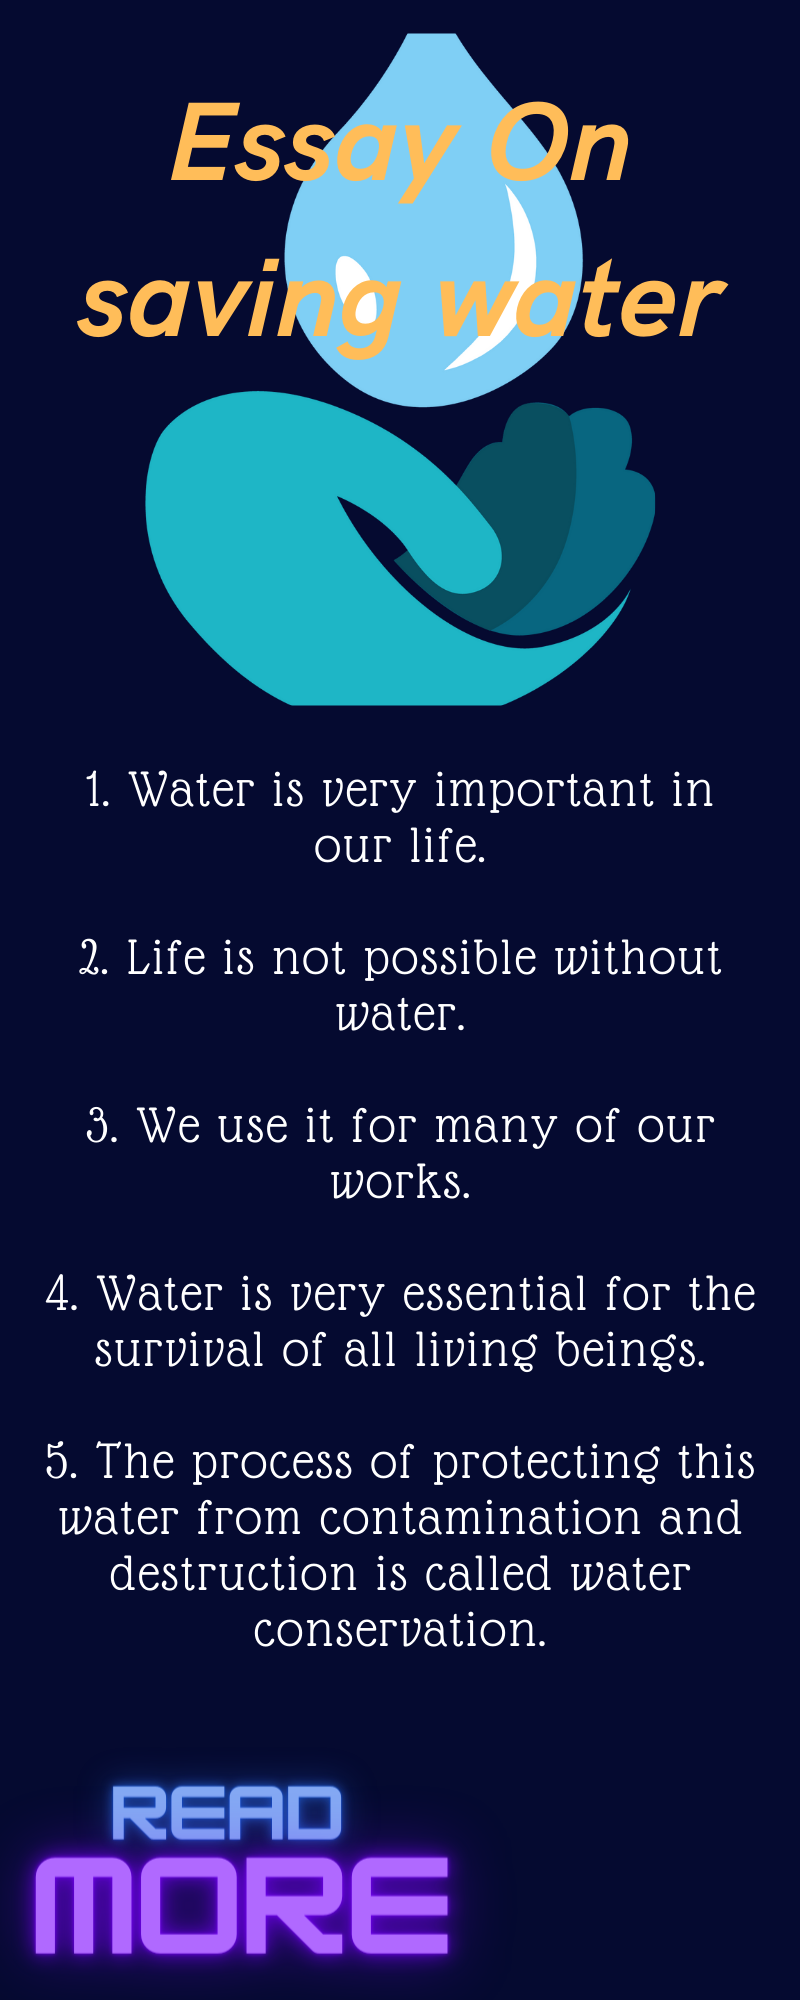 save water safe life essay